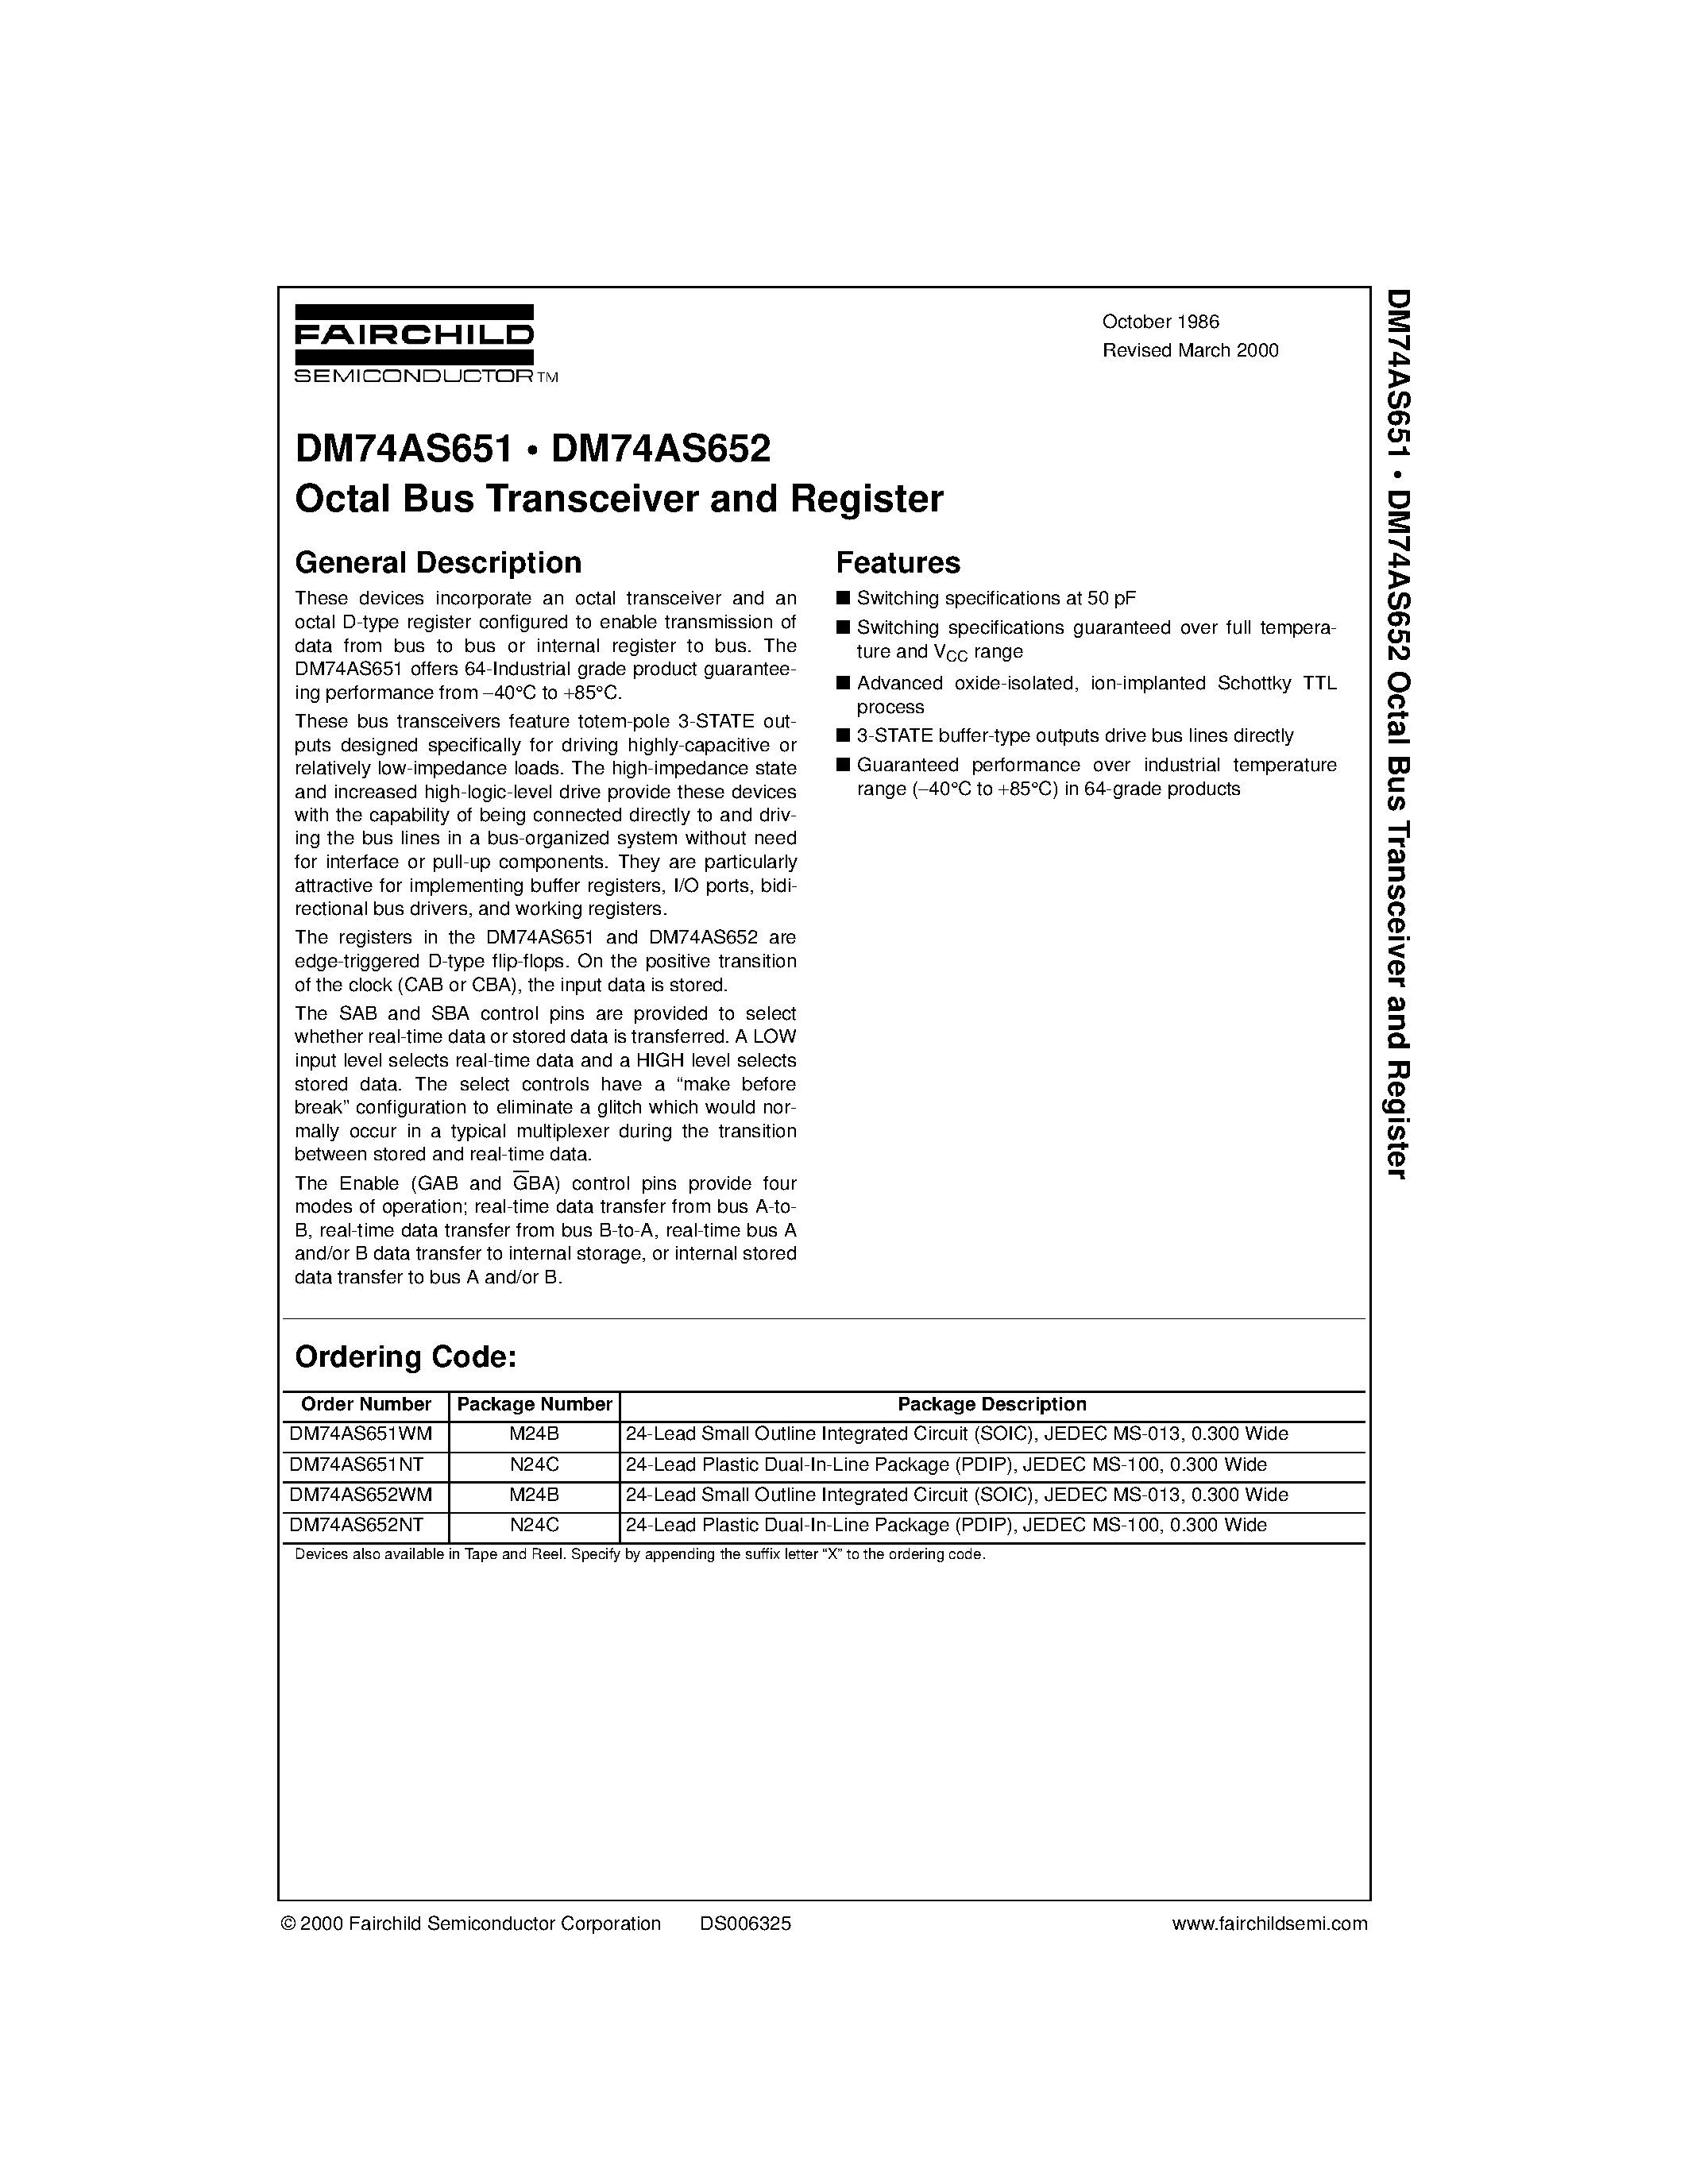 Datasheet DM74AS651NT - Octal Bus Transceiver and Register page 1